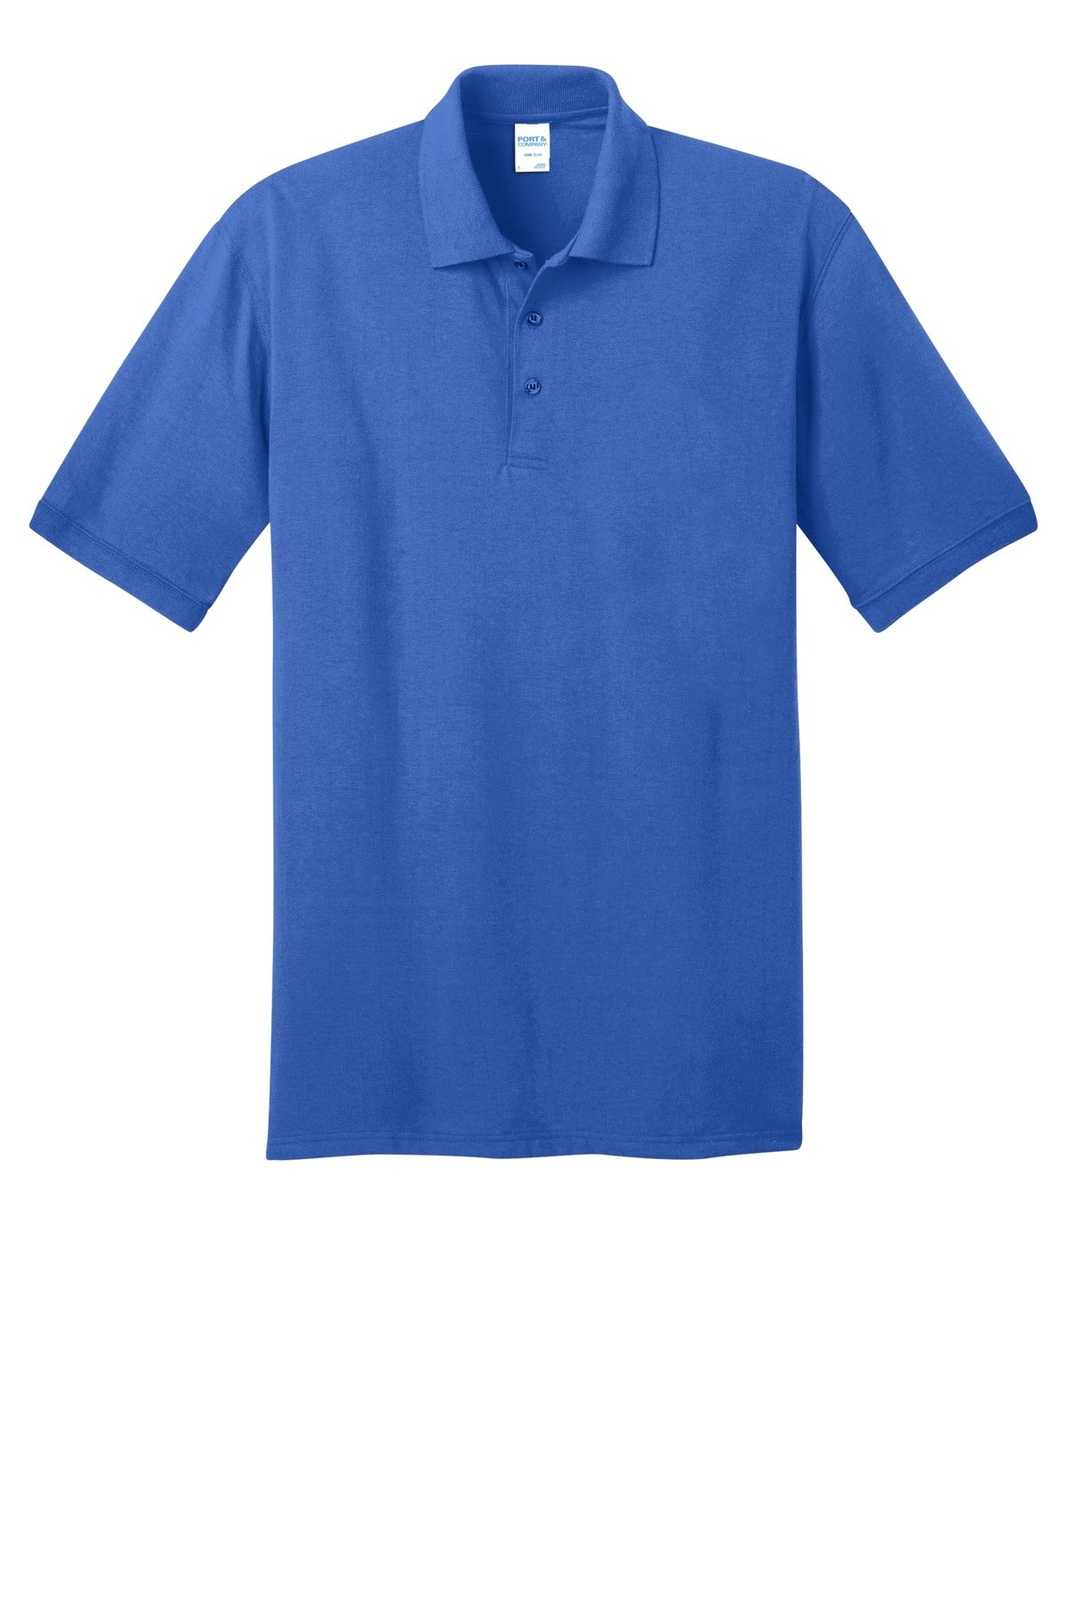 Port &amp; Company KP55T Tall Core Blend Jersey Knit Polo - Royal - HIT a Double - 2